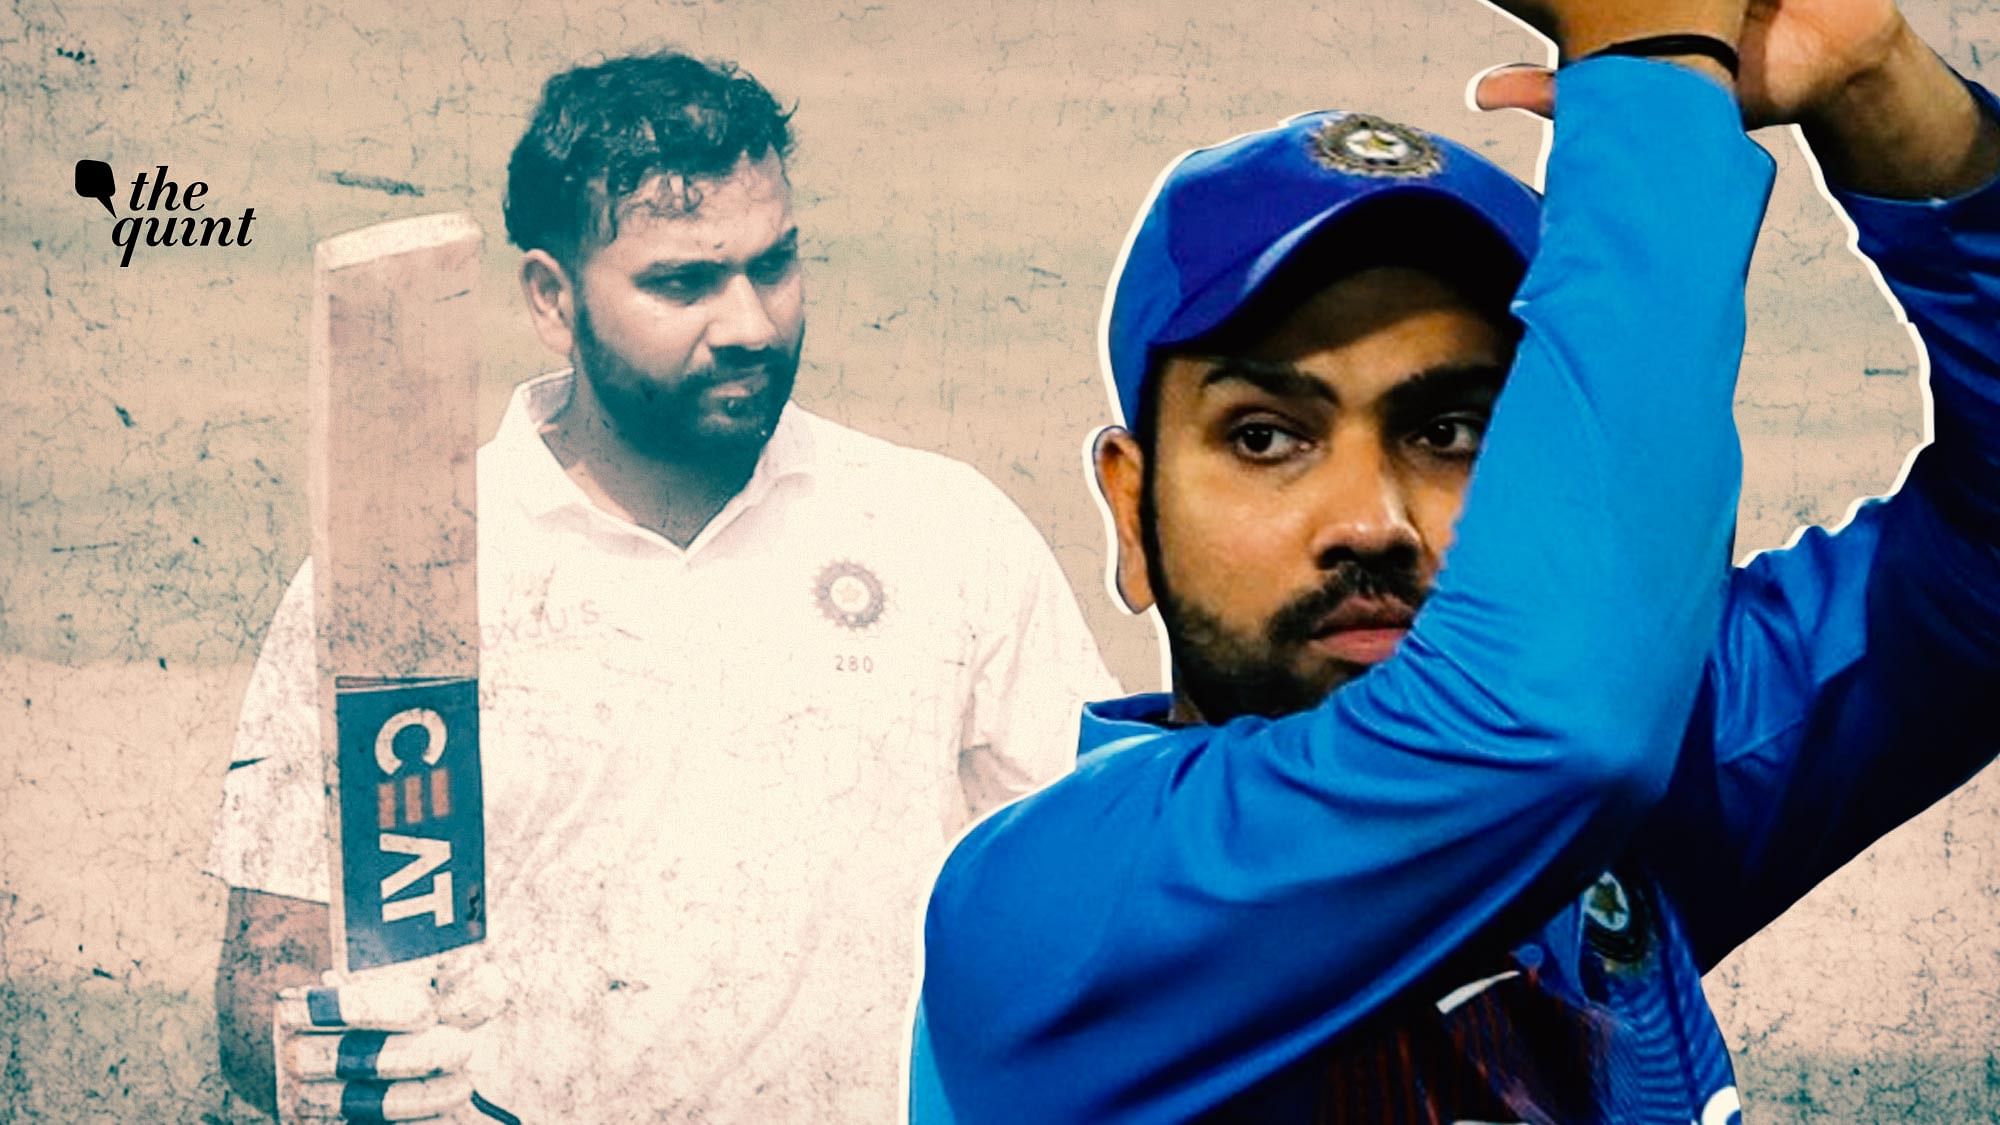 Rohit Sharma aggregated 2442 runs from 47 international innings at an average of 53.08 in 2019.